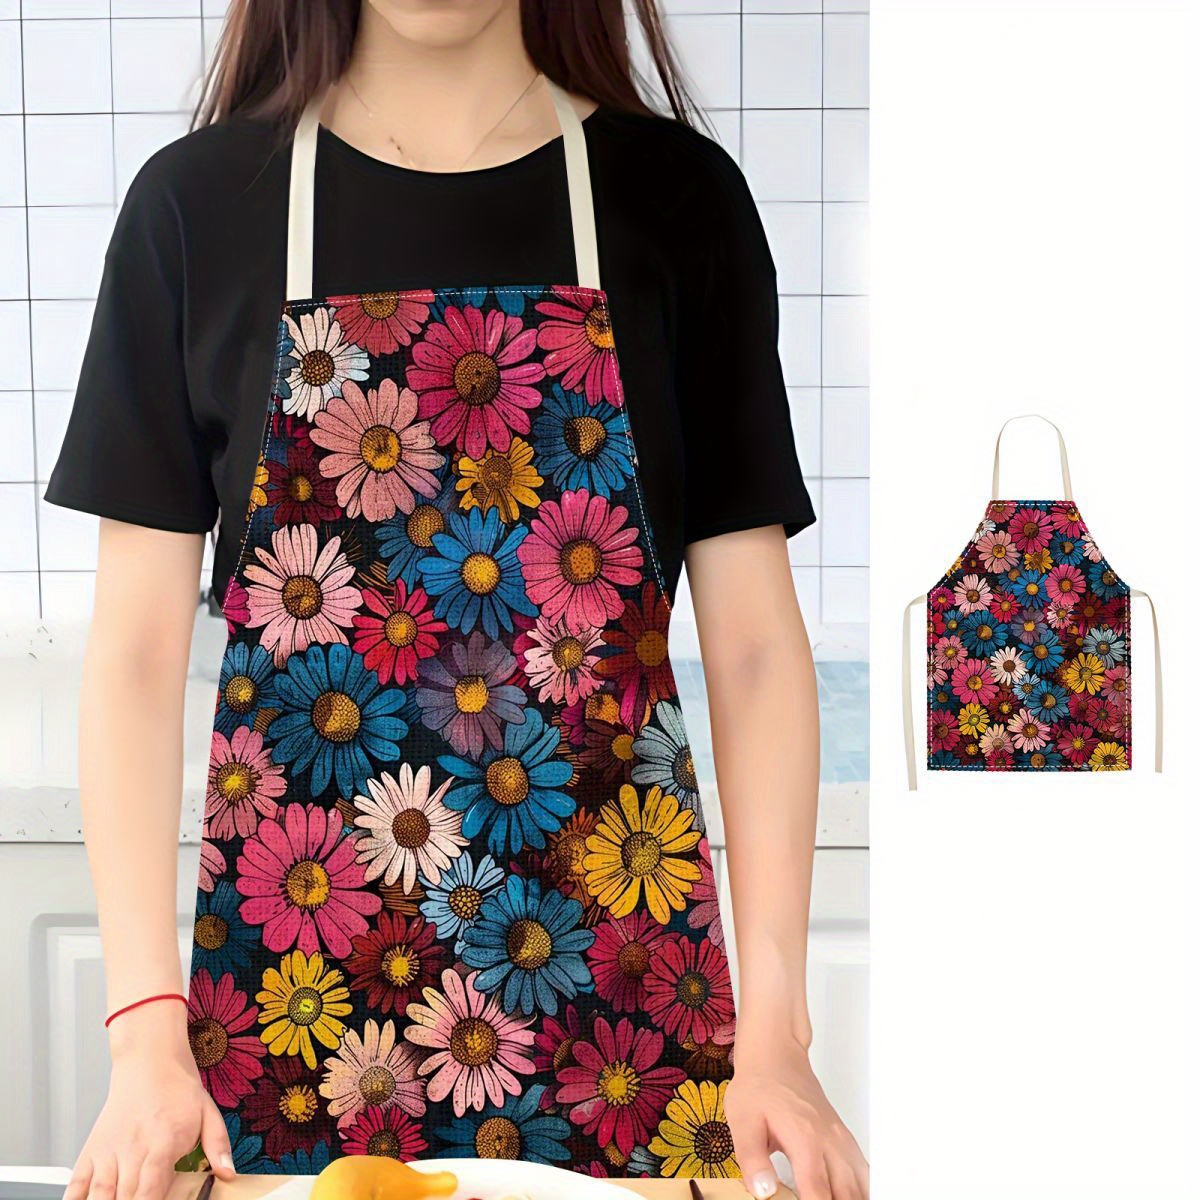 

Floral Chef Apron - Durable Stain Resistant Kitchen Apron With Adjustable Neck Strap And Front Pocket, 100% Polyester Woven Fabric, Festive Flower Pattern Cooking Apron For Women